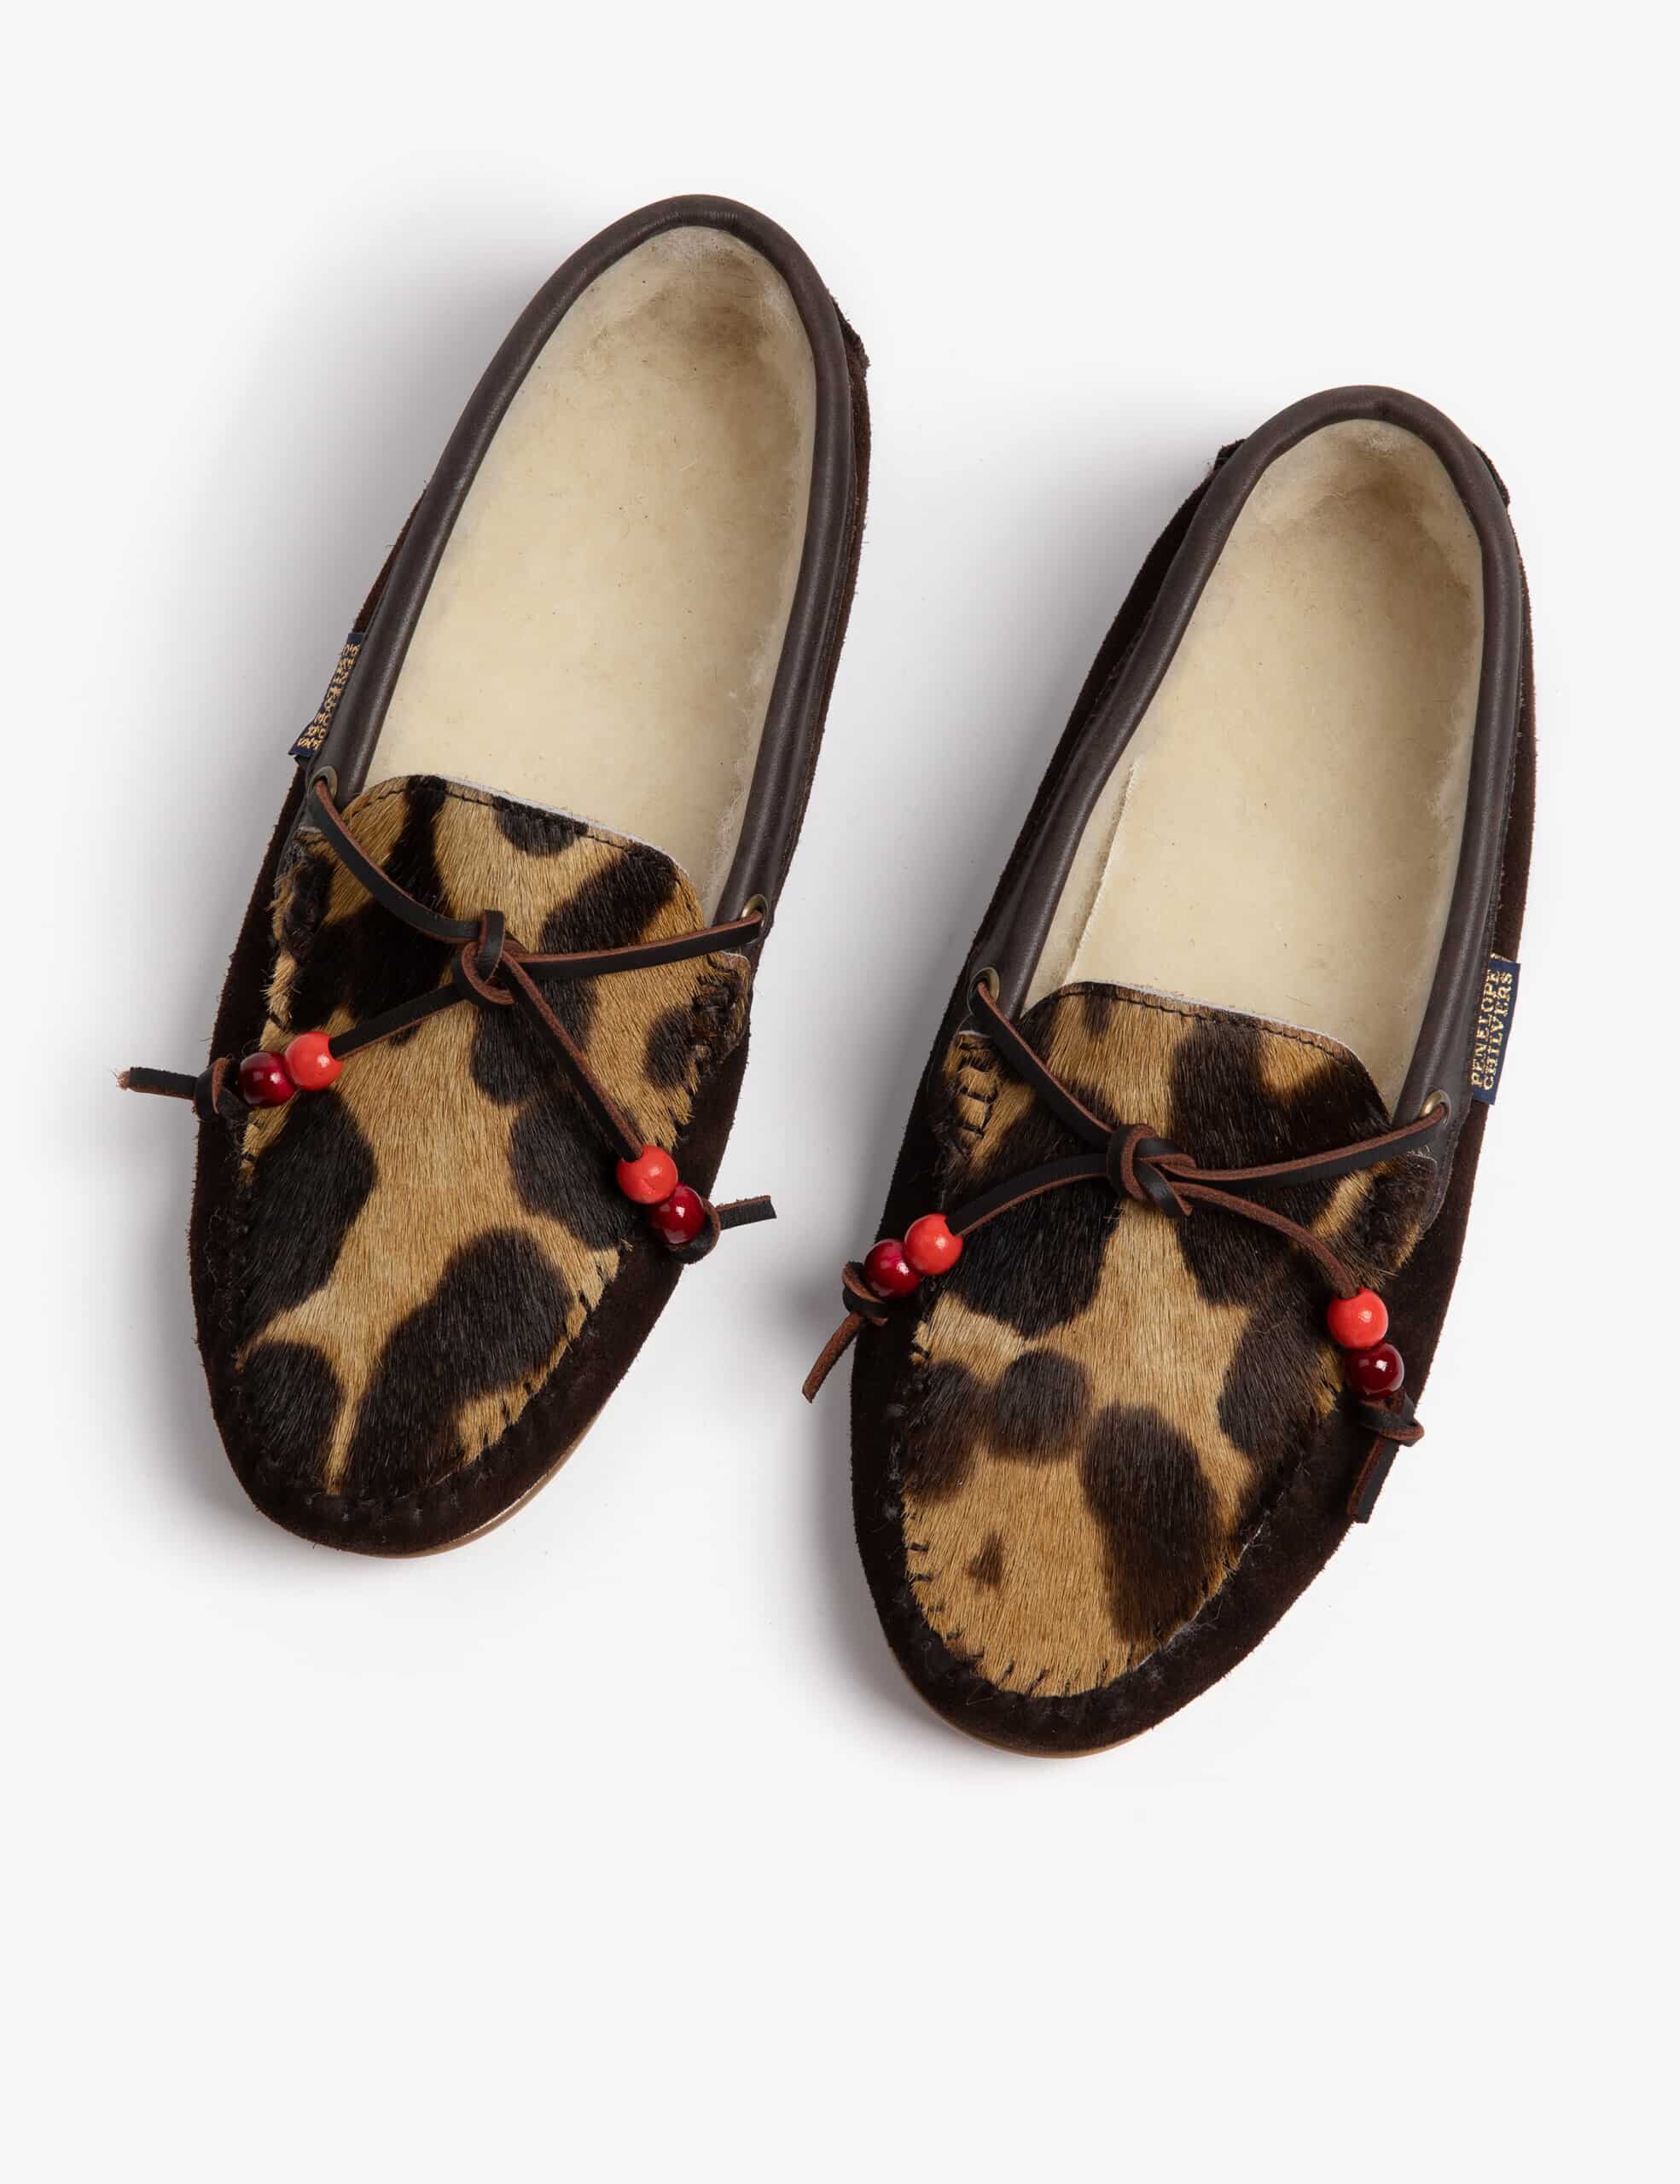 Moccasin Tortoiseshell Wool-Lined Slippers